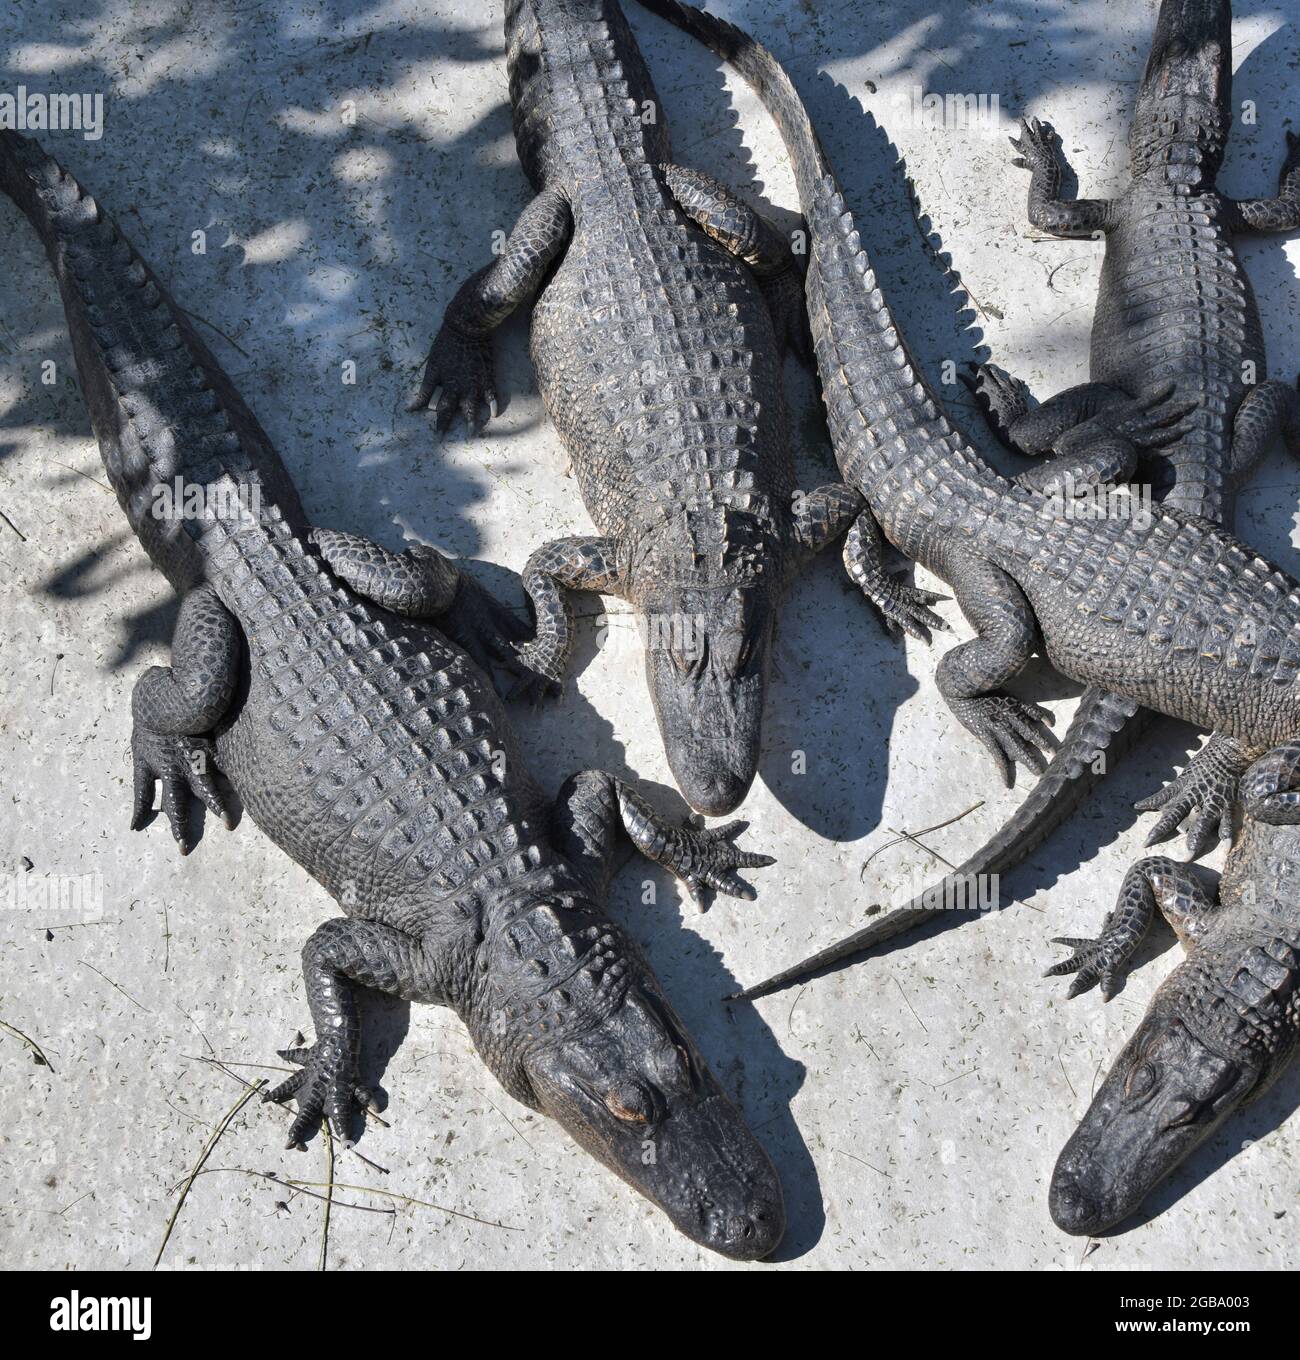 A number of alligators sunning themselves at the birding and nature center and alligator sanctuary, on South Padre Island, Texas U.S.A.. Stock Photo